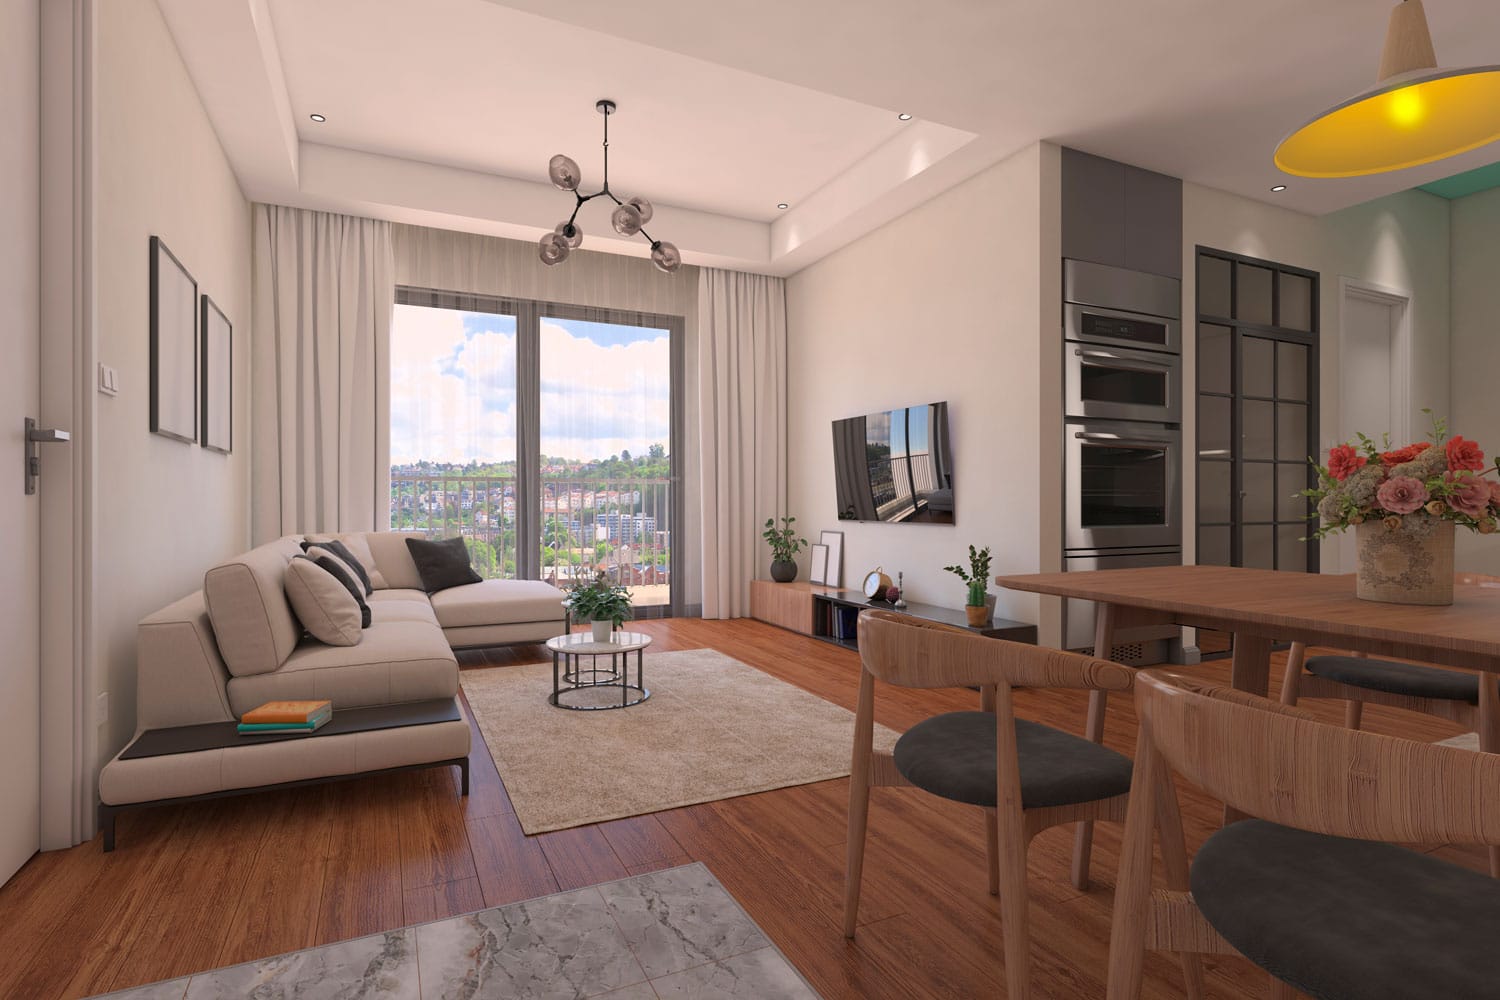 Luxurious spacious living room at condominium with hardwood flooring and white walls with matching curtains